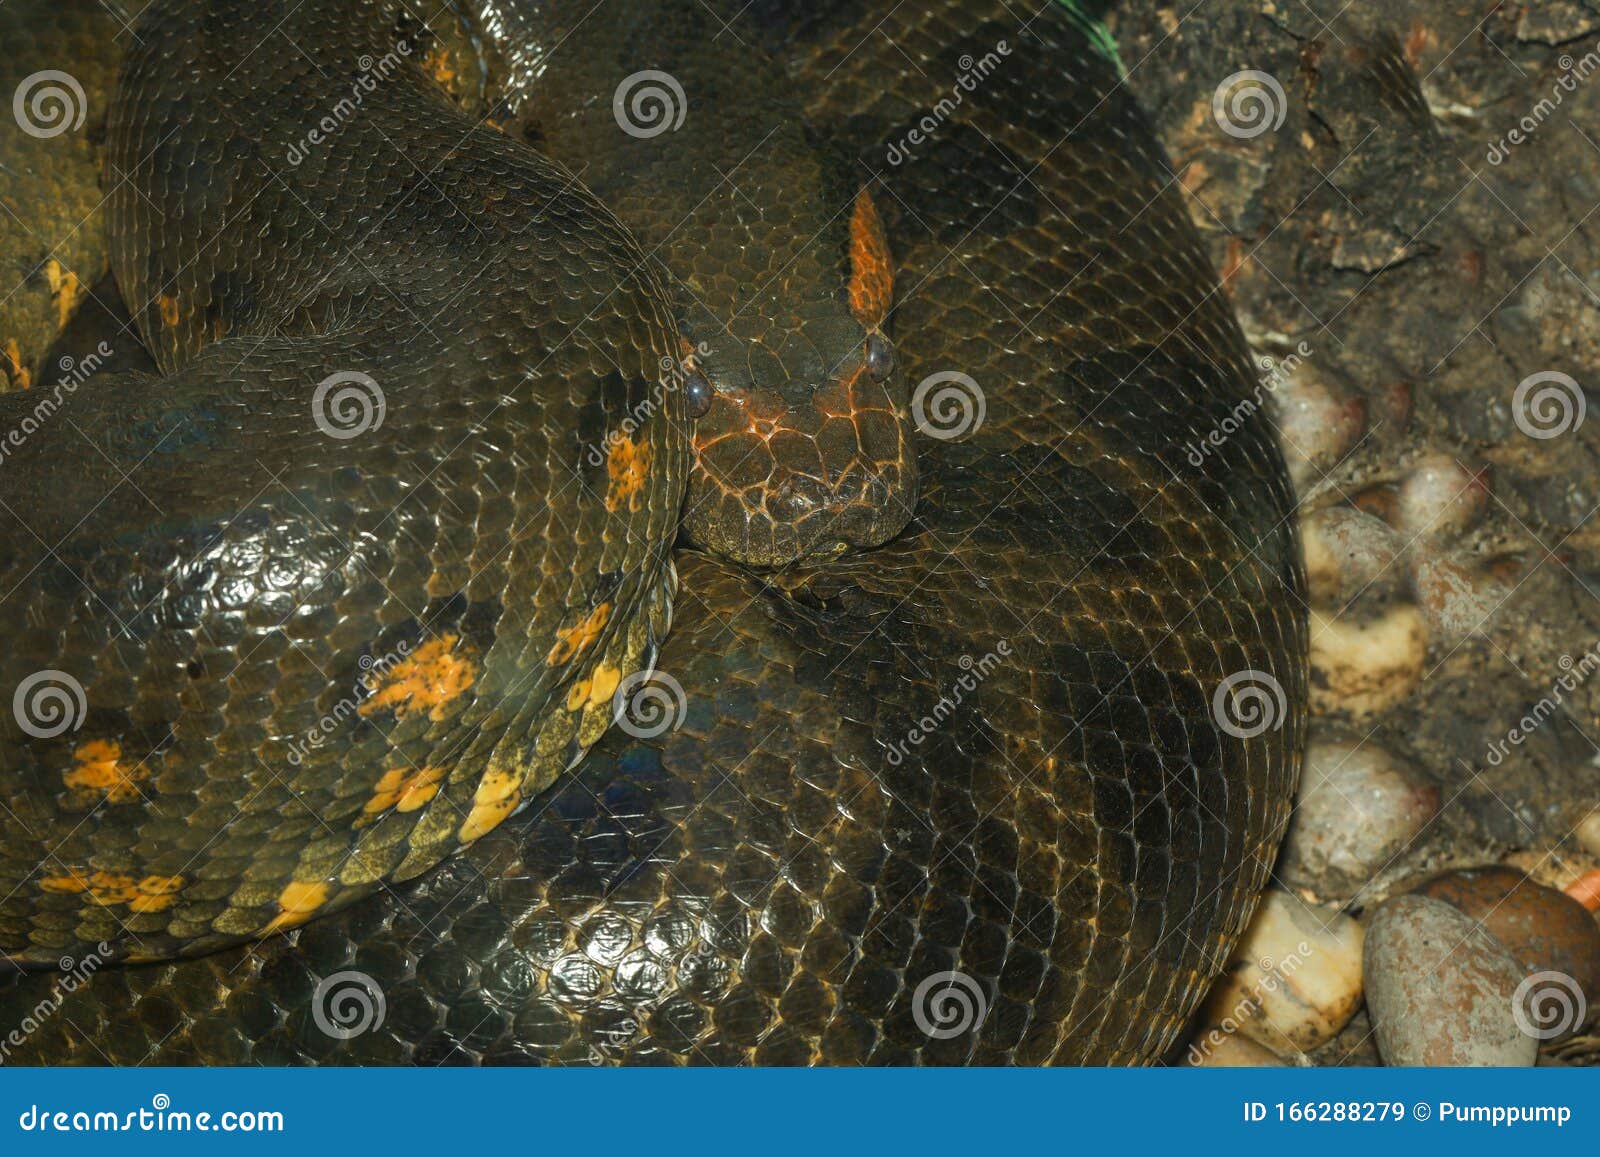 Close Up Green Anaconda Snake Is Biggest Snake In The World Stock